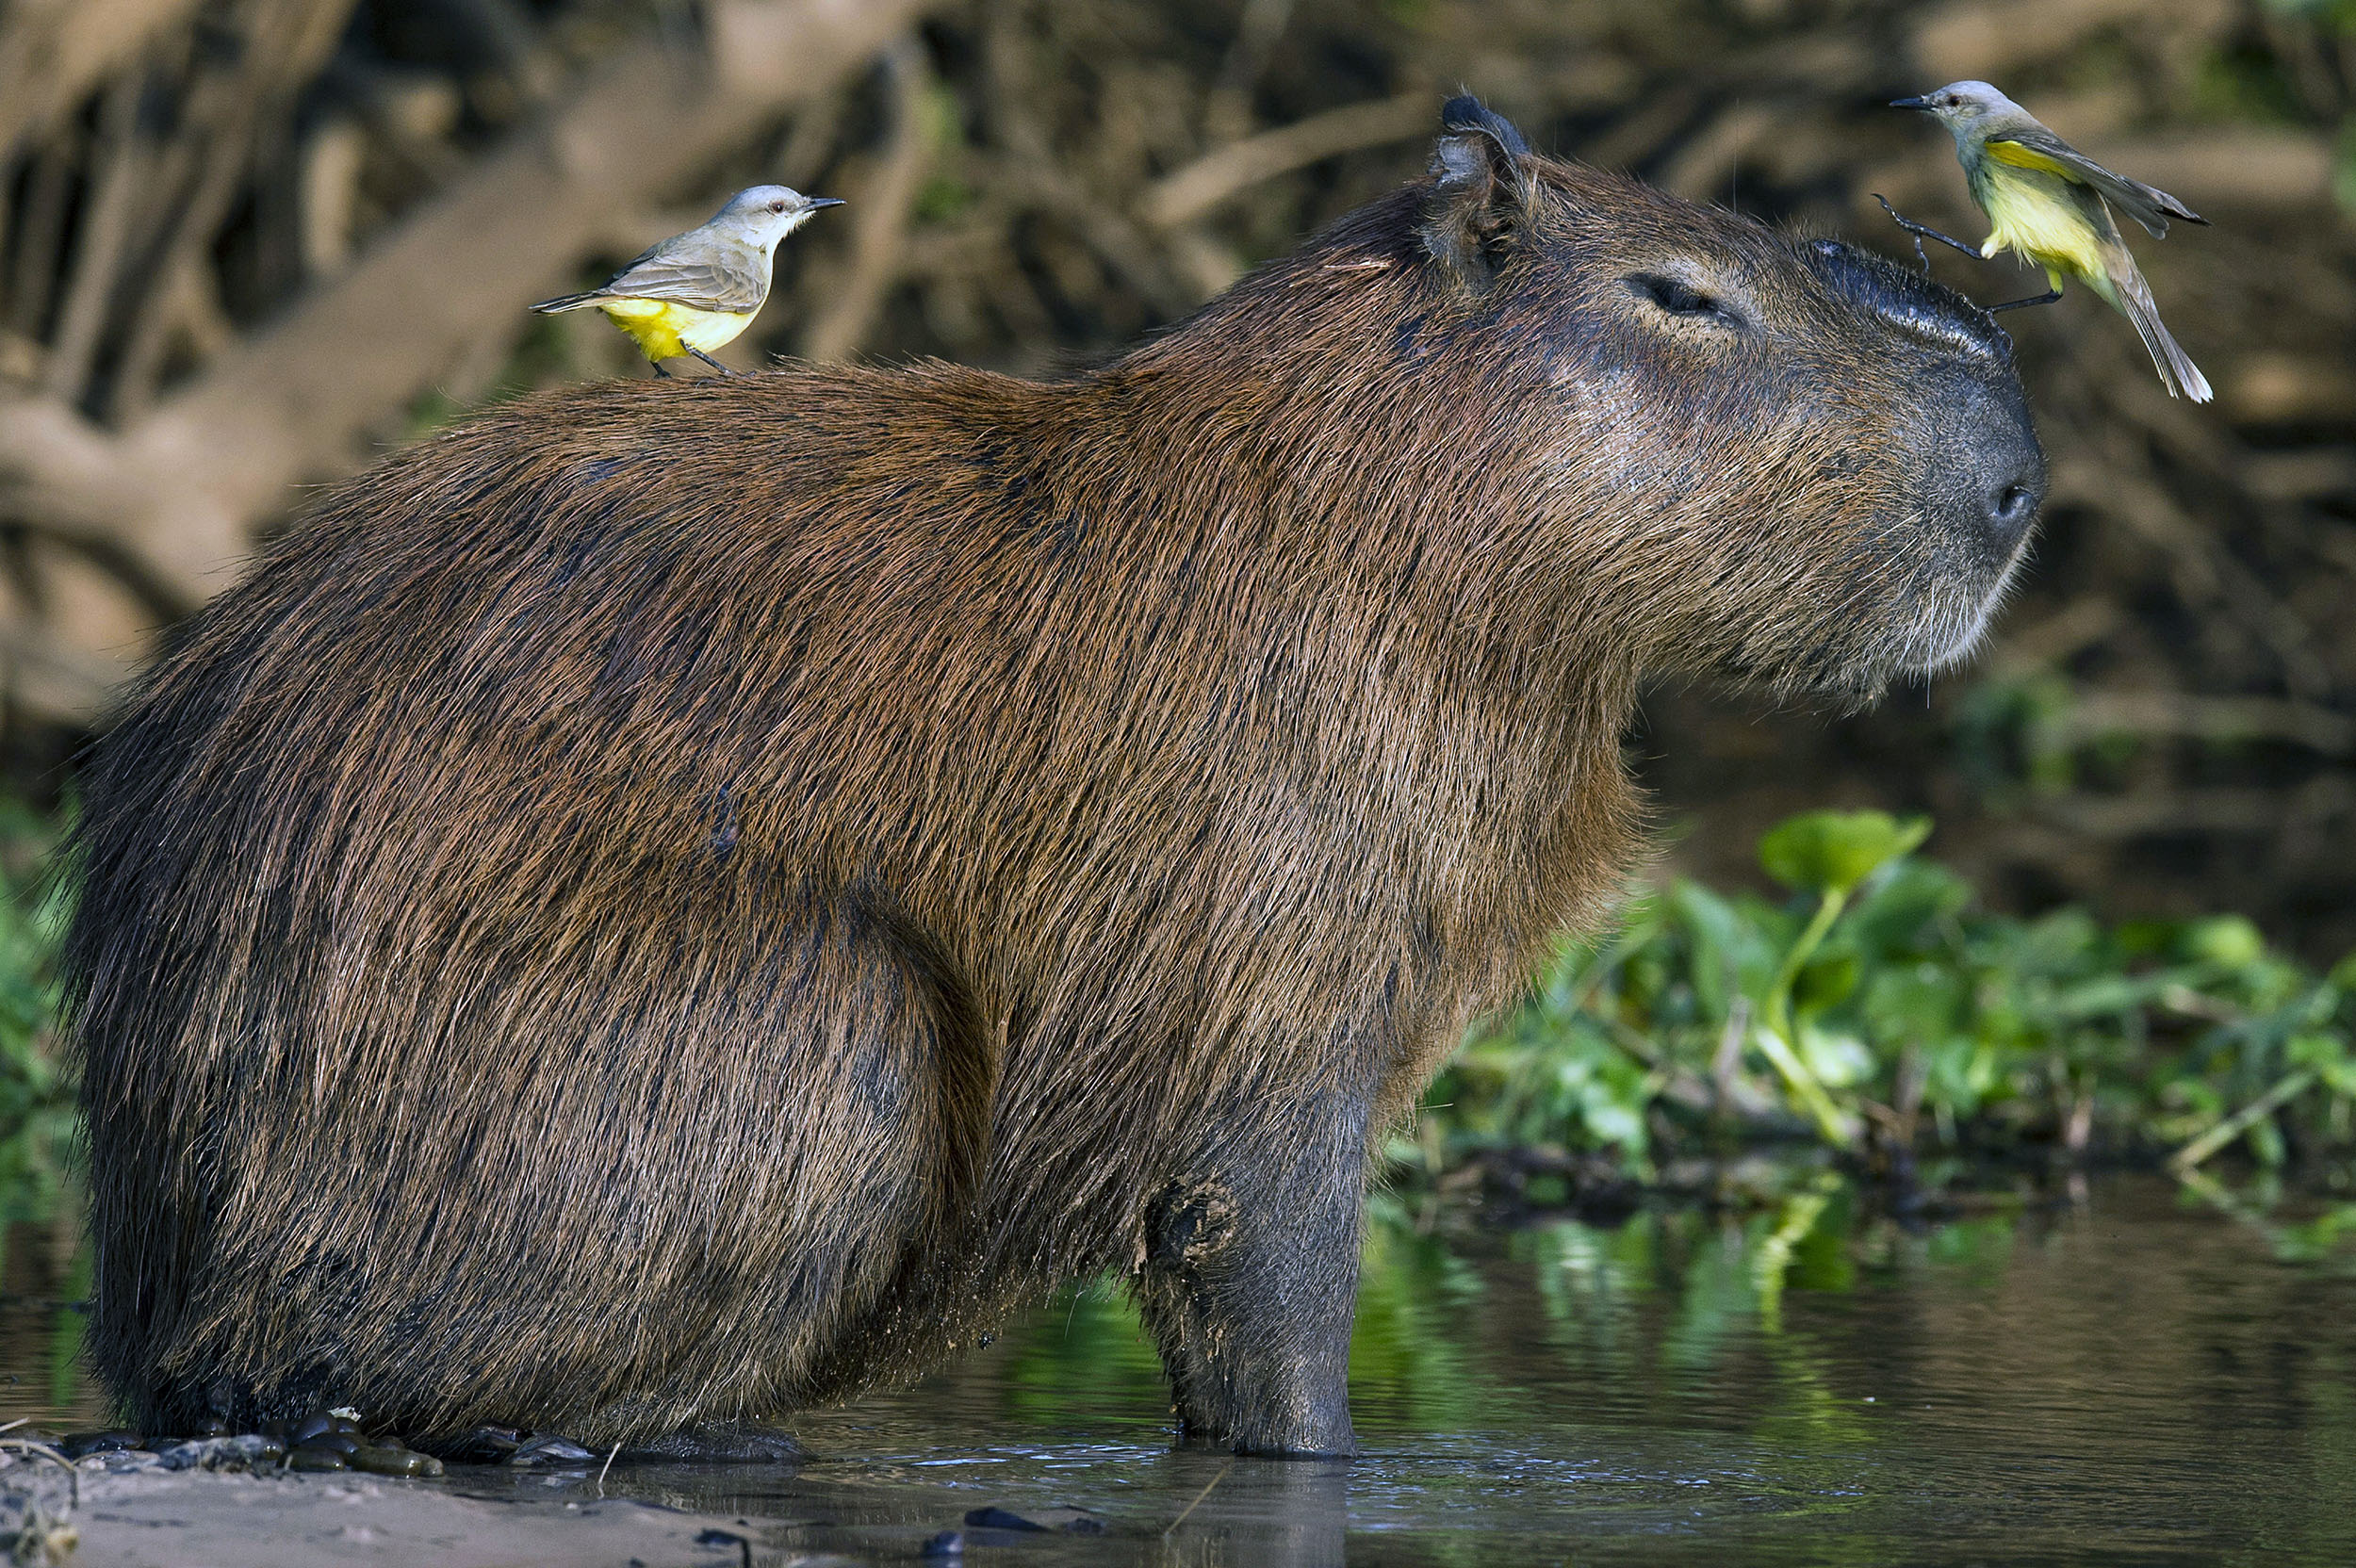 The capybara, a giant sleepy-looking rodent with birds perched in its head